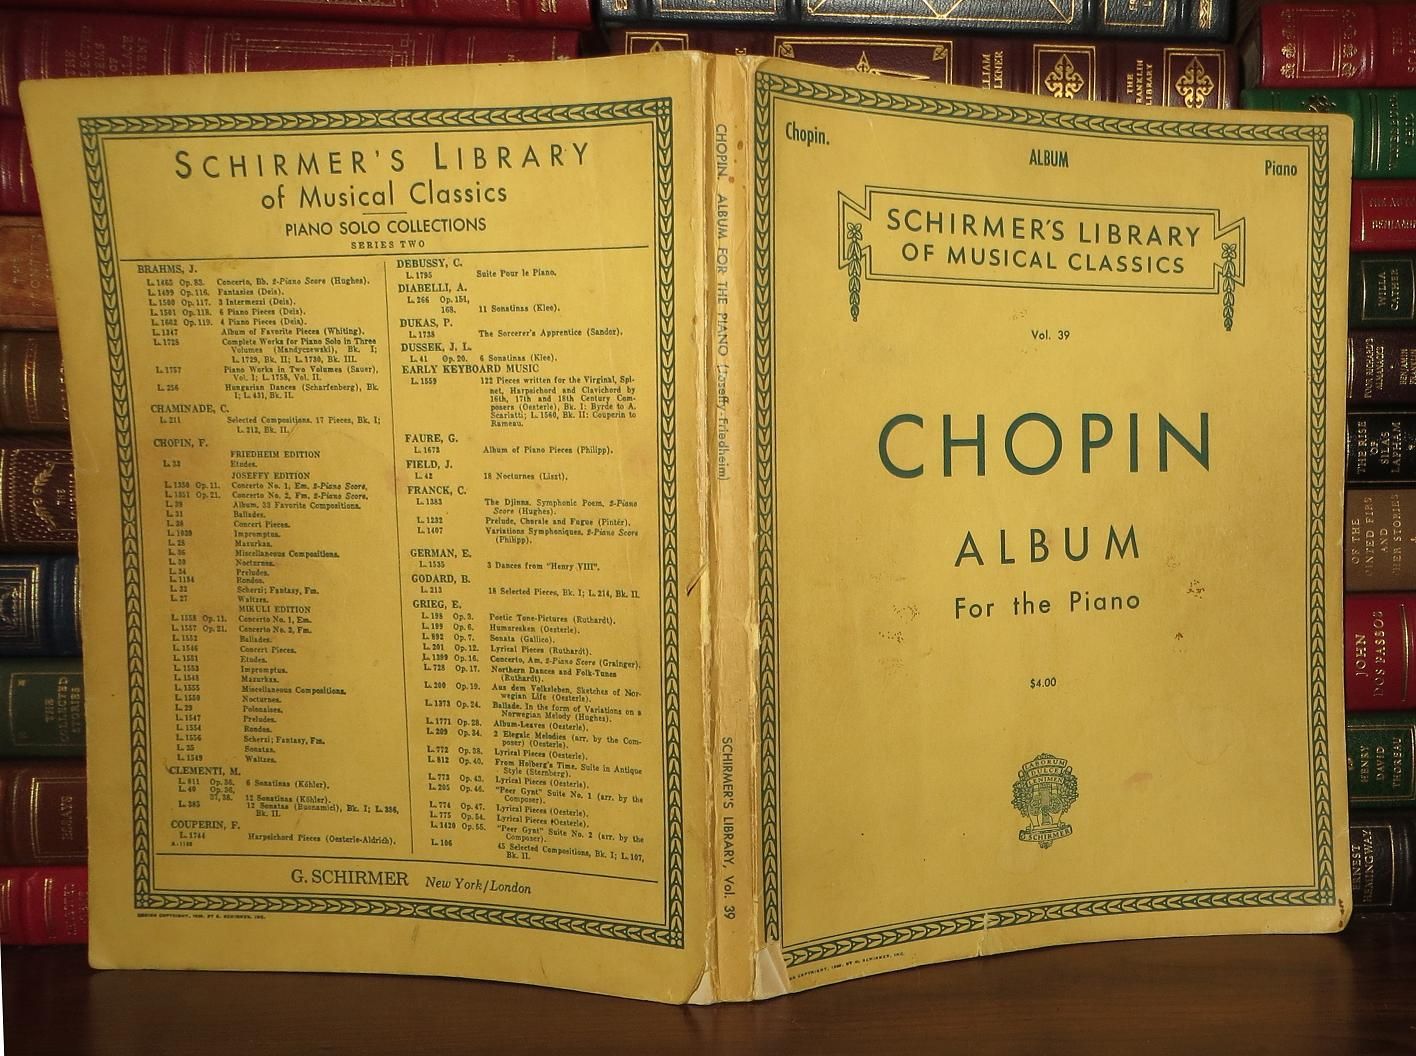 CHOPIN, FREDERIC - Album for the Piano